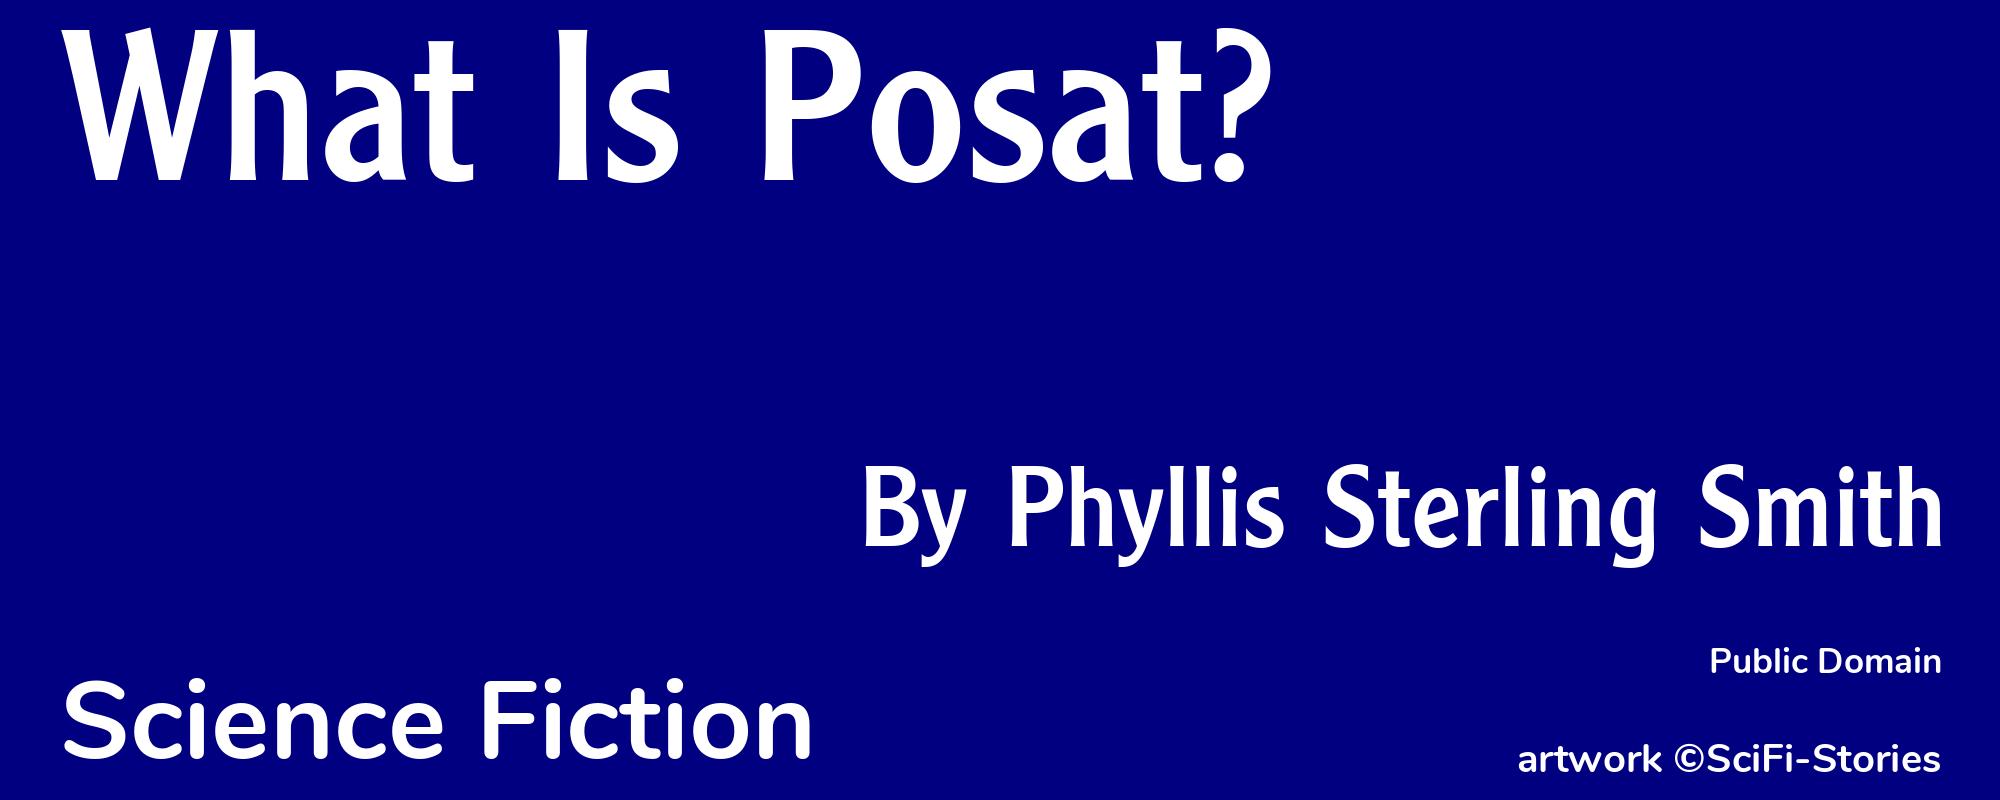 What Is Posat? - Cover